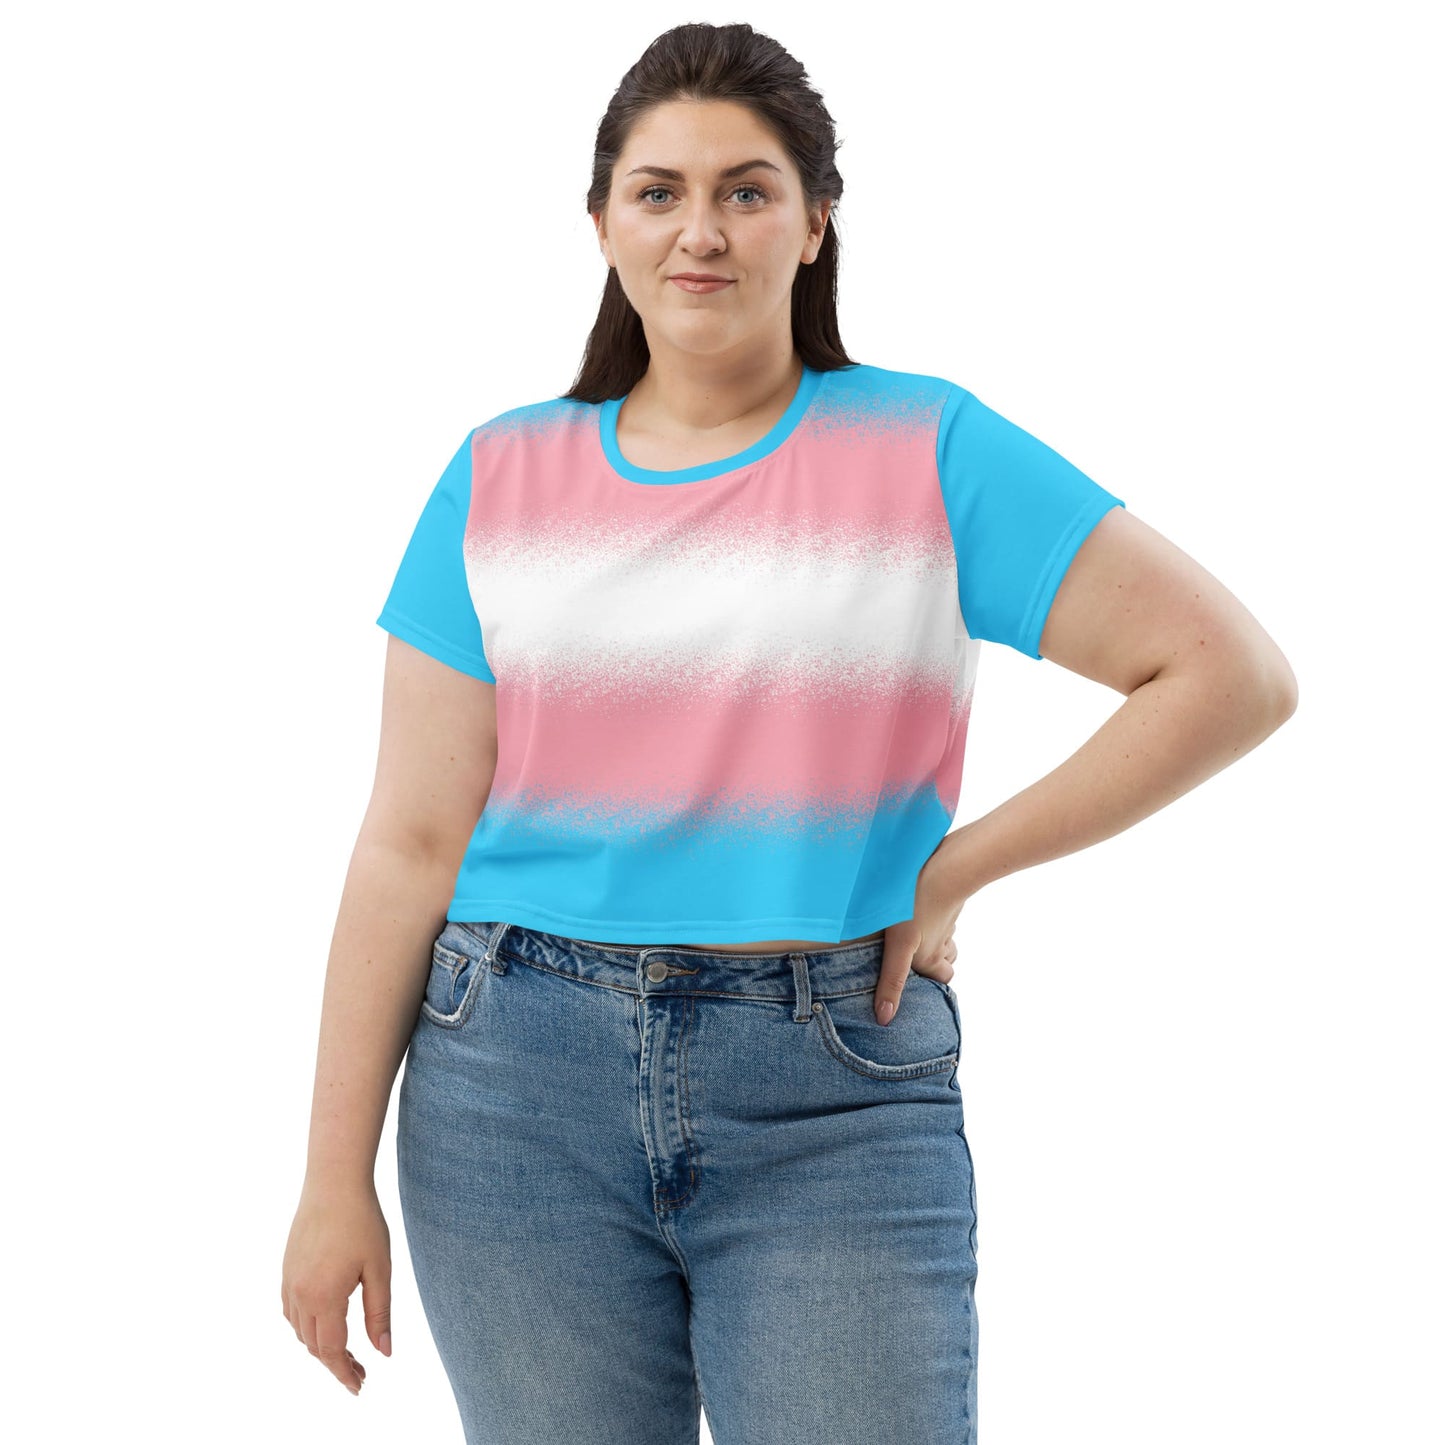 transgender crop top, trans pride cropped shirt with wings on the back, front